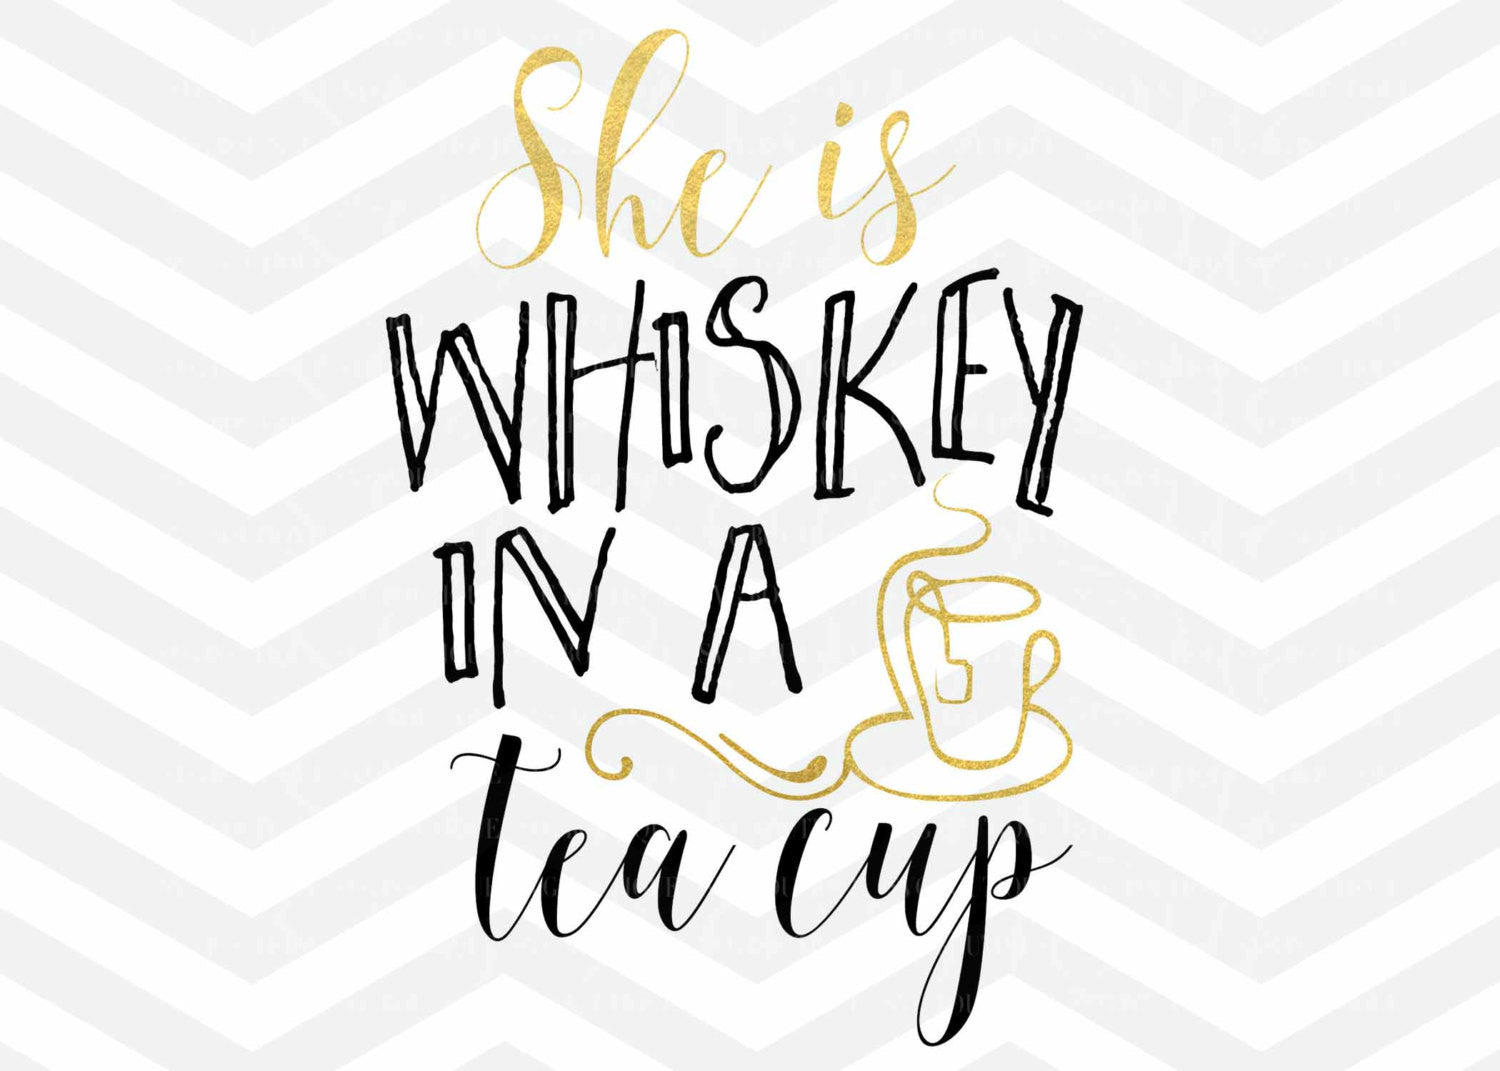 Download She Is Whiskey In A Teacup Svg File Cut File Whiskey Svg File Clip Svg Boutique